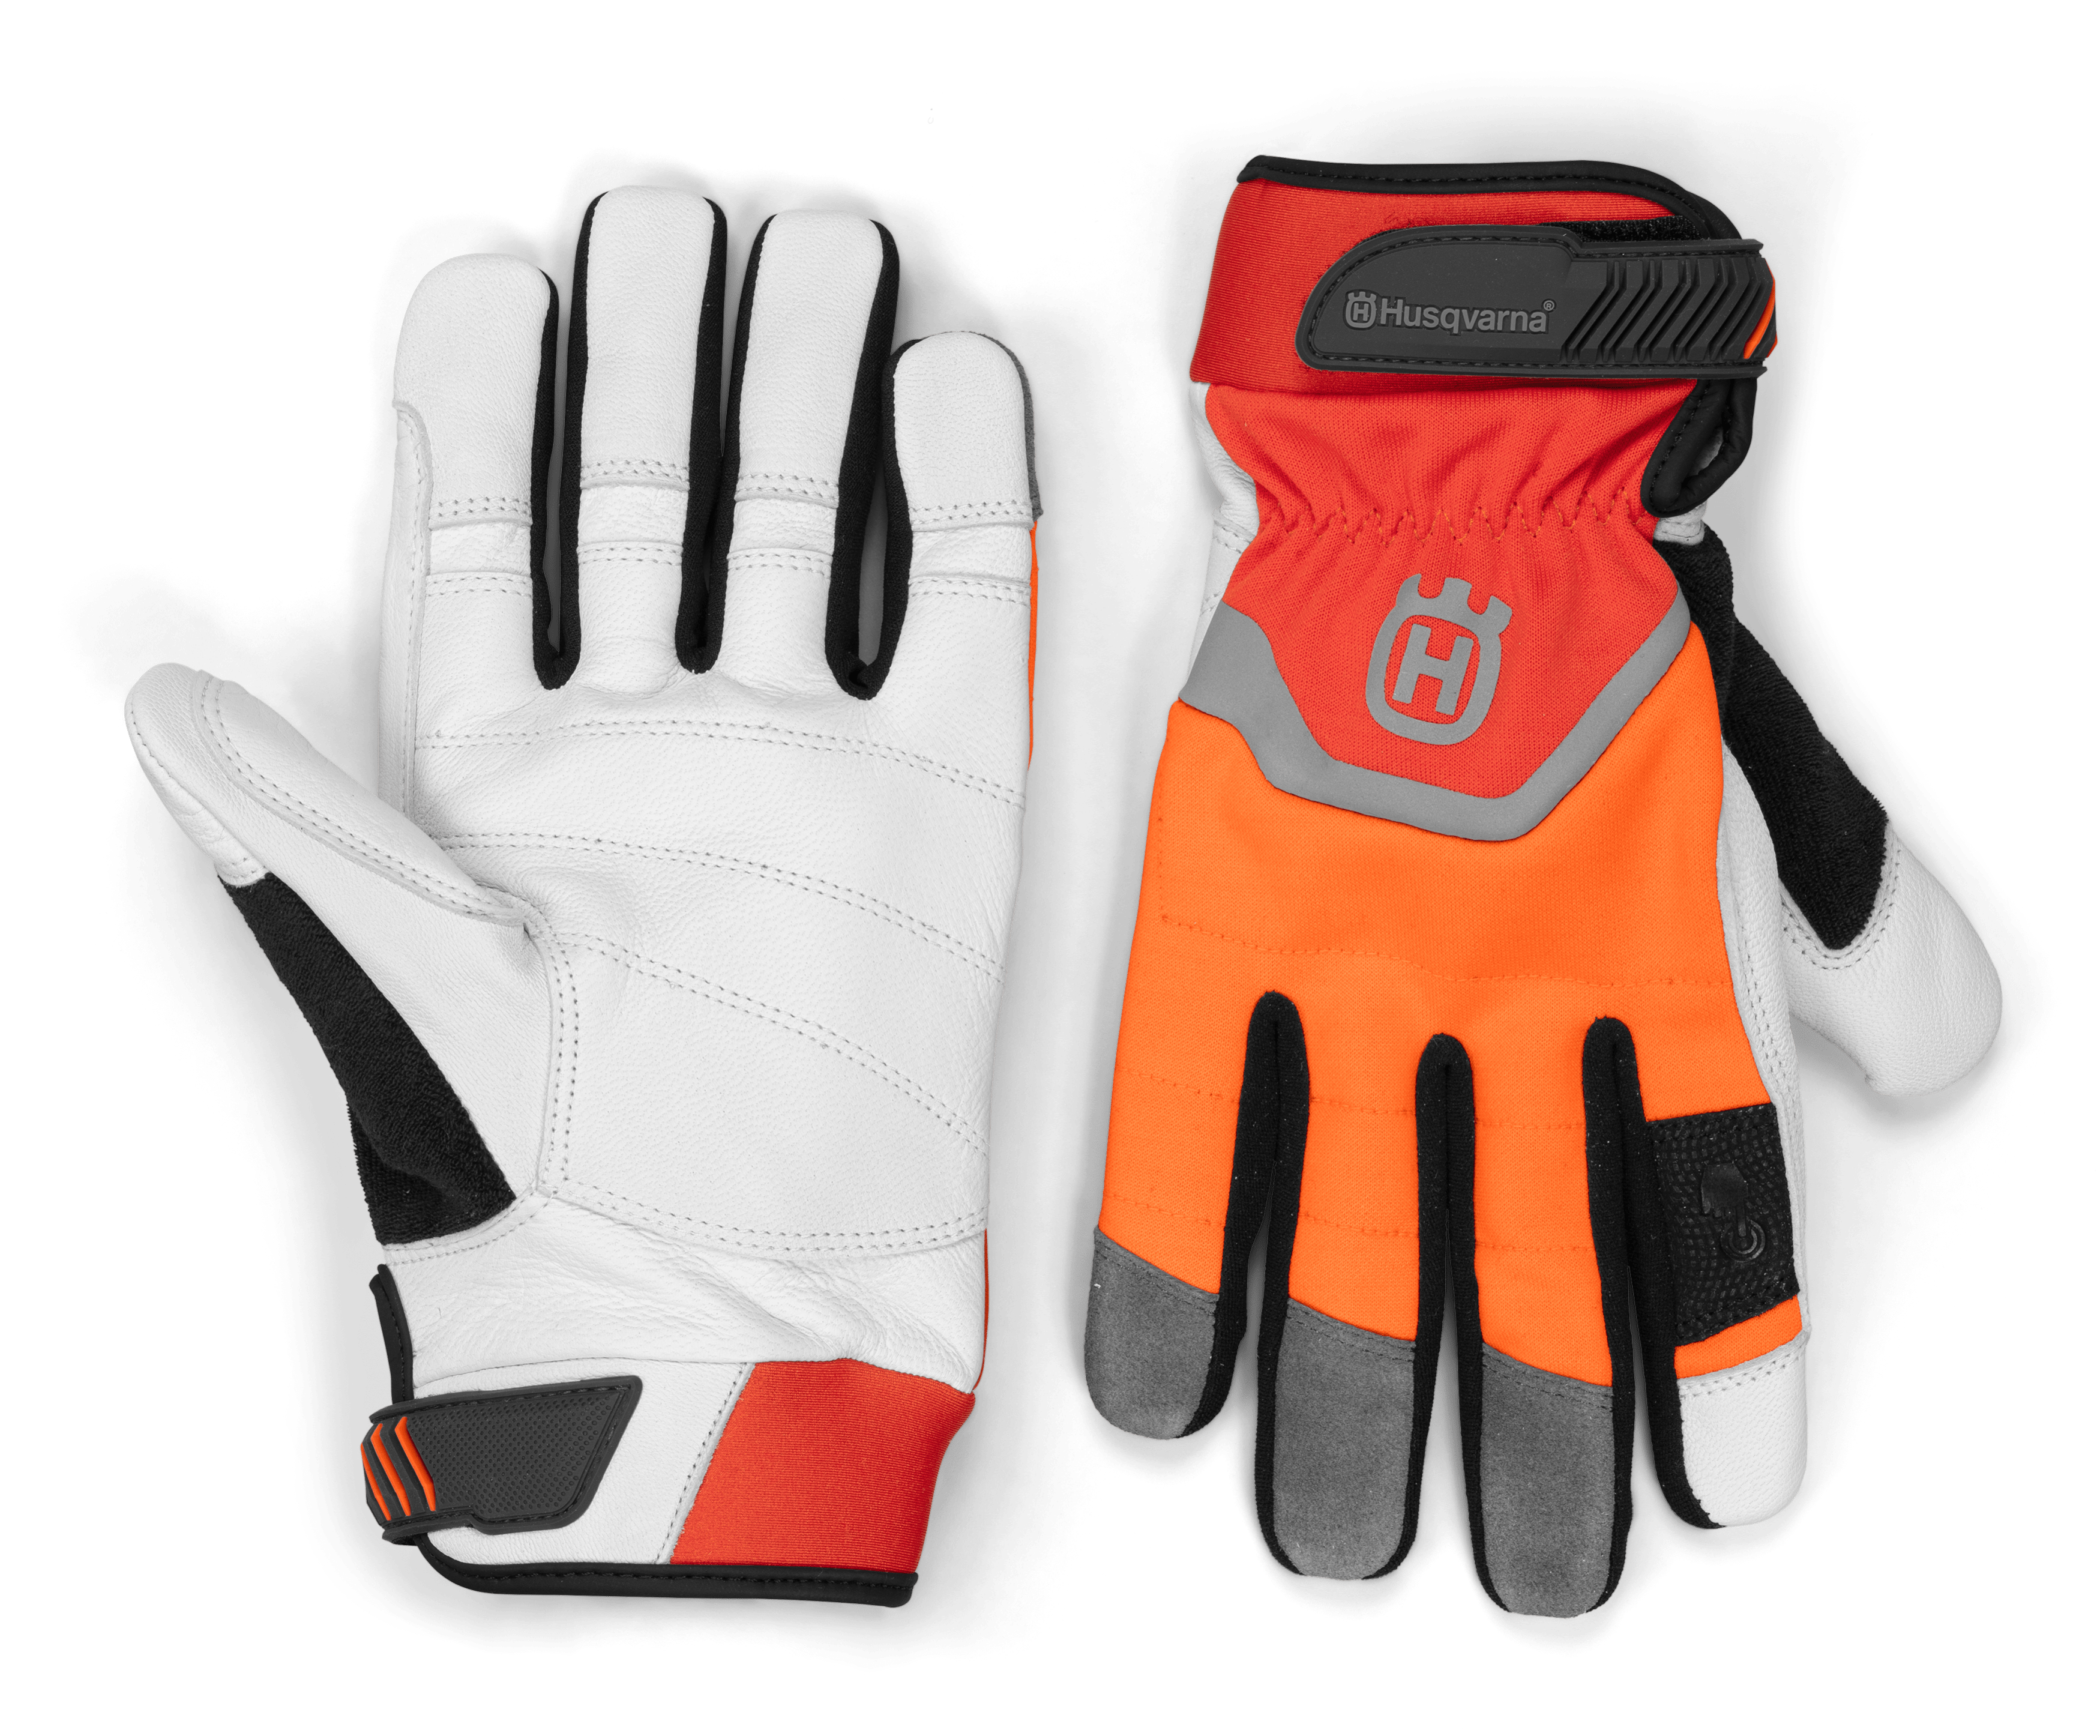 Gloves, Technical with saw protection